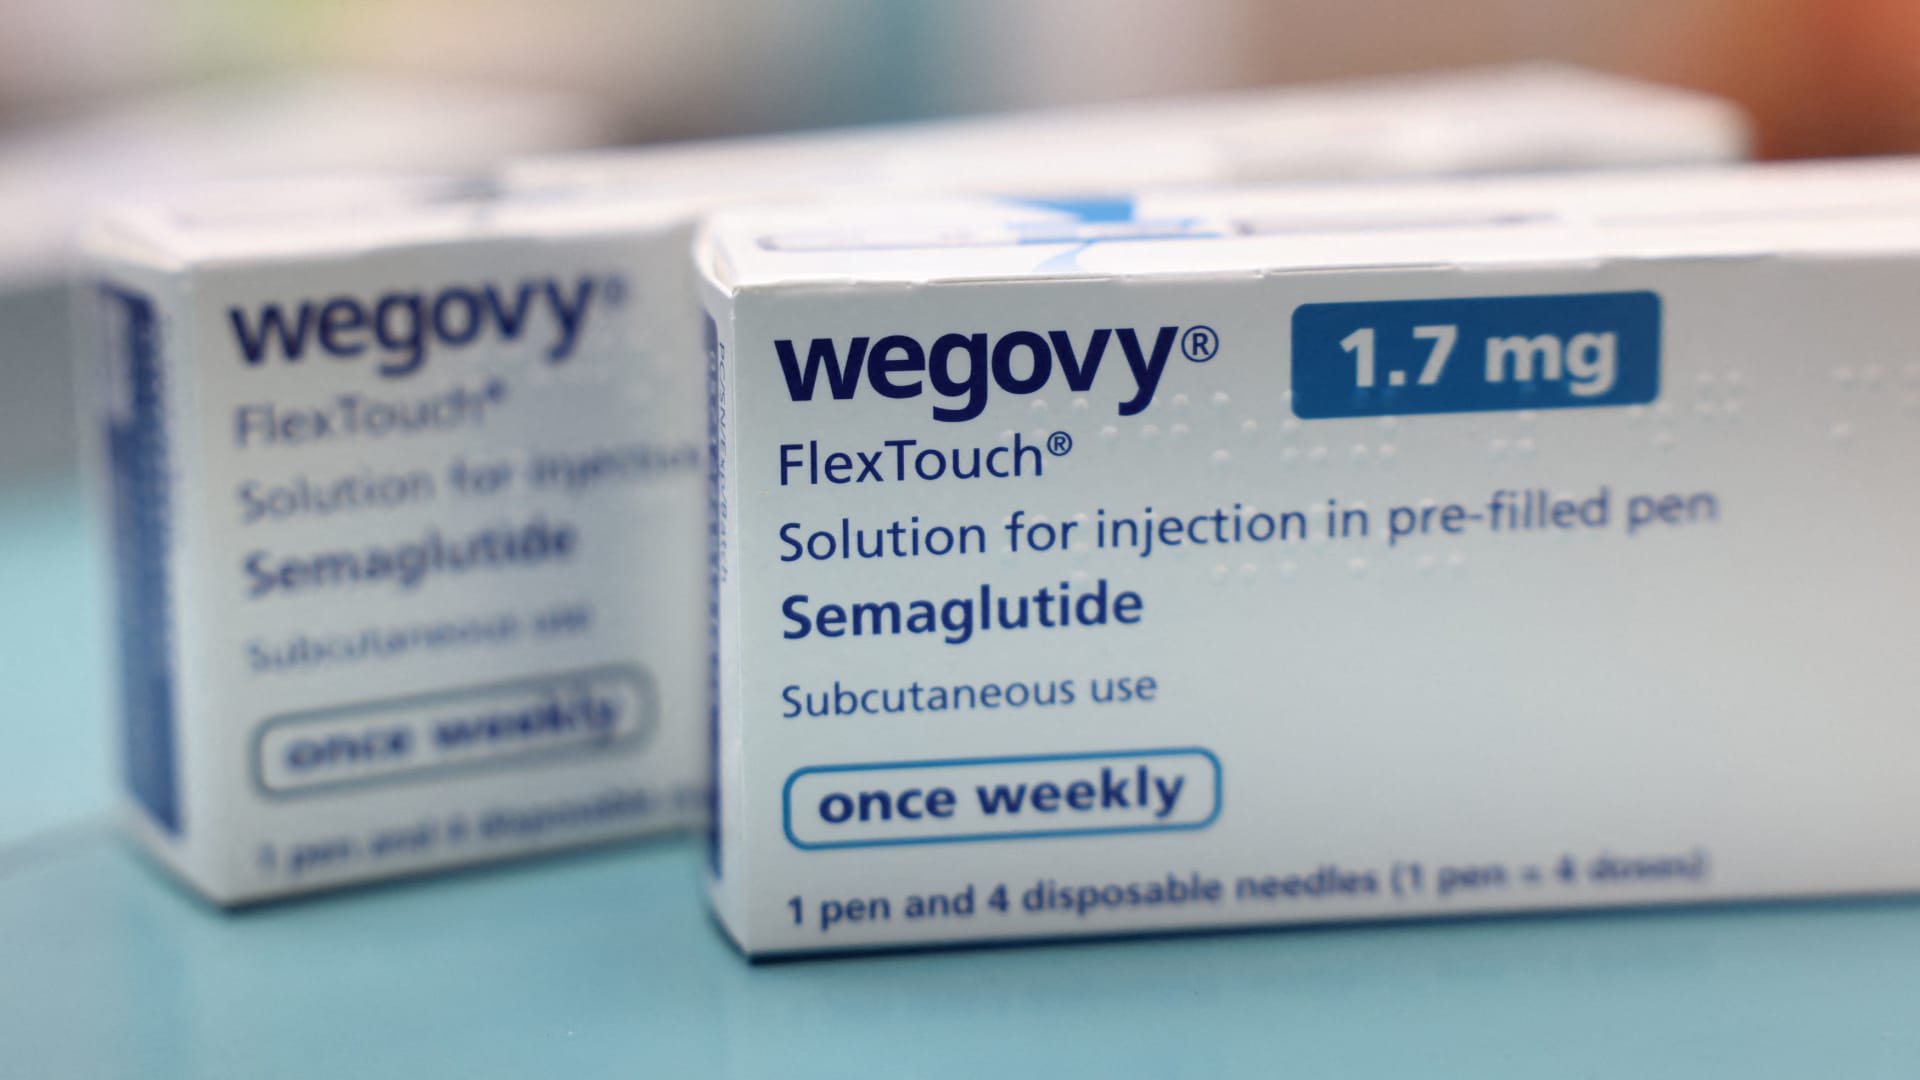 Wegovy patients maintain weight loss for 4 years: Novo Nordisk study [Video]